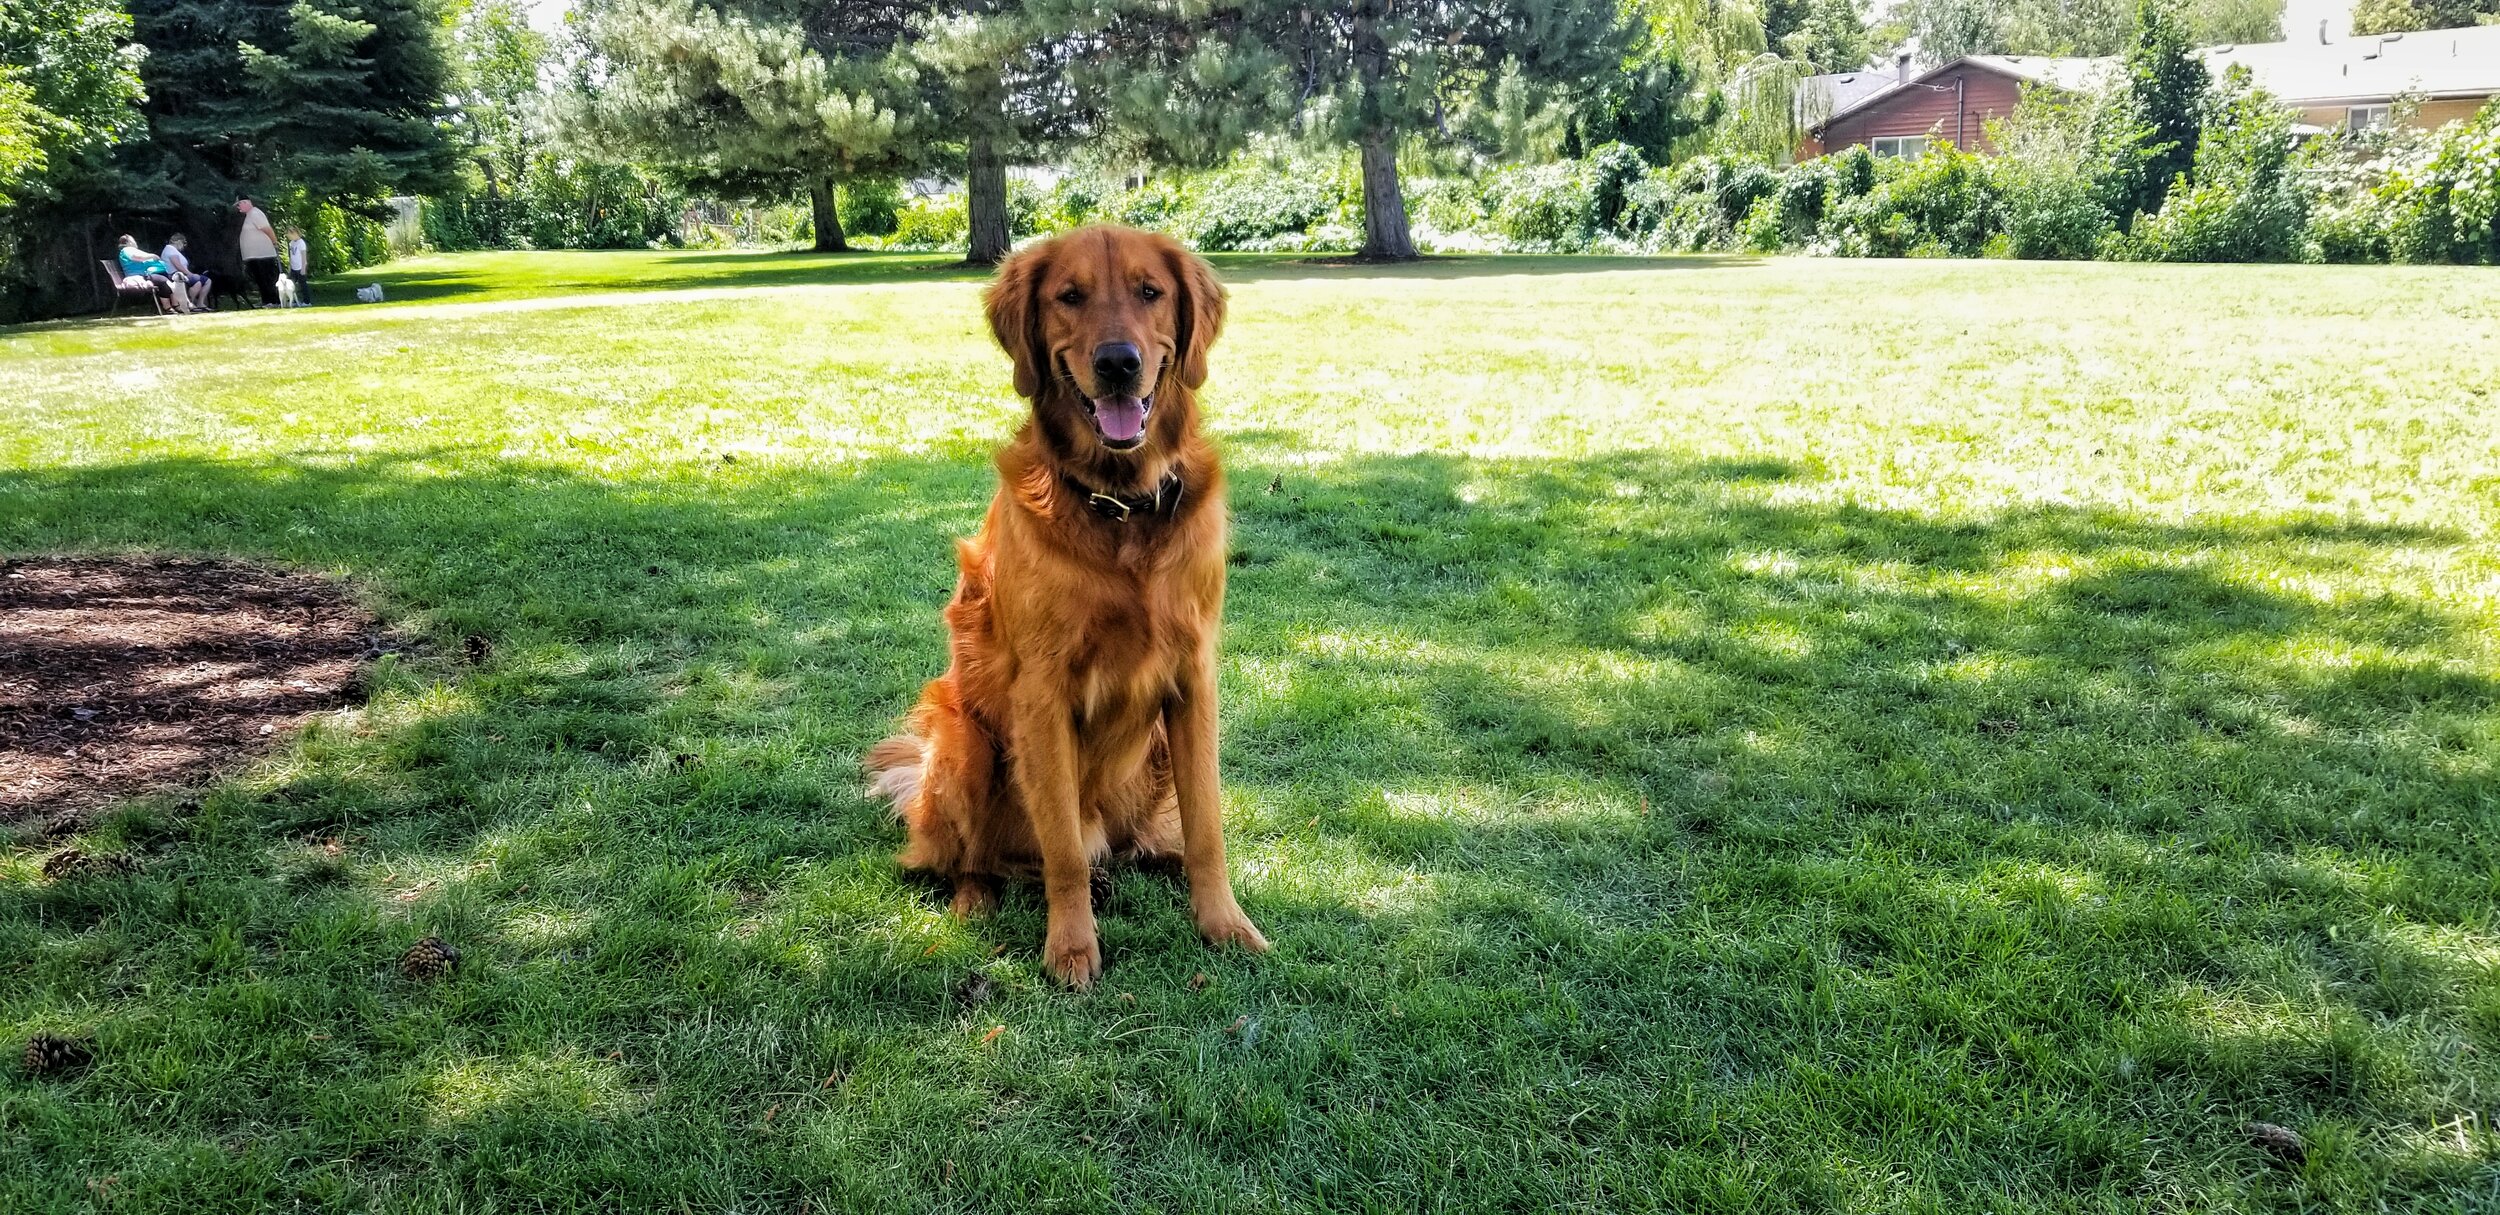 Golden retriever Scout sits with ears perked in a grassy park